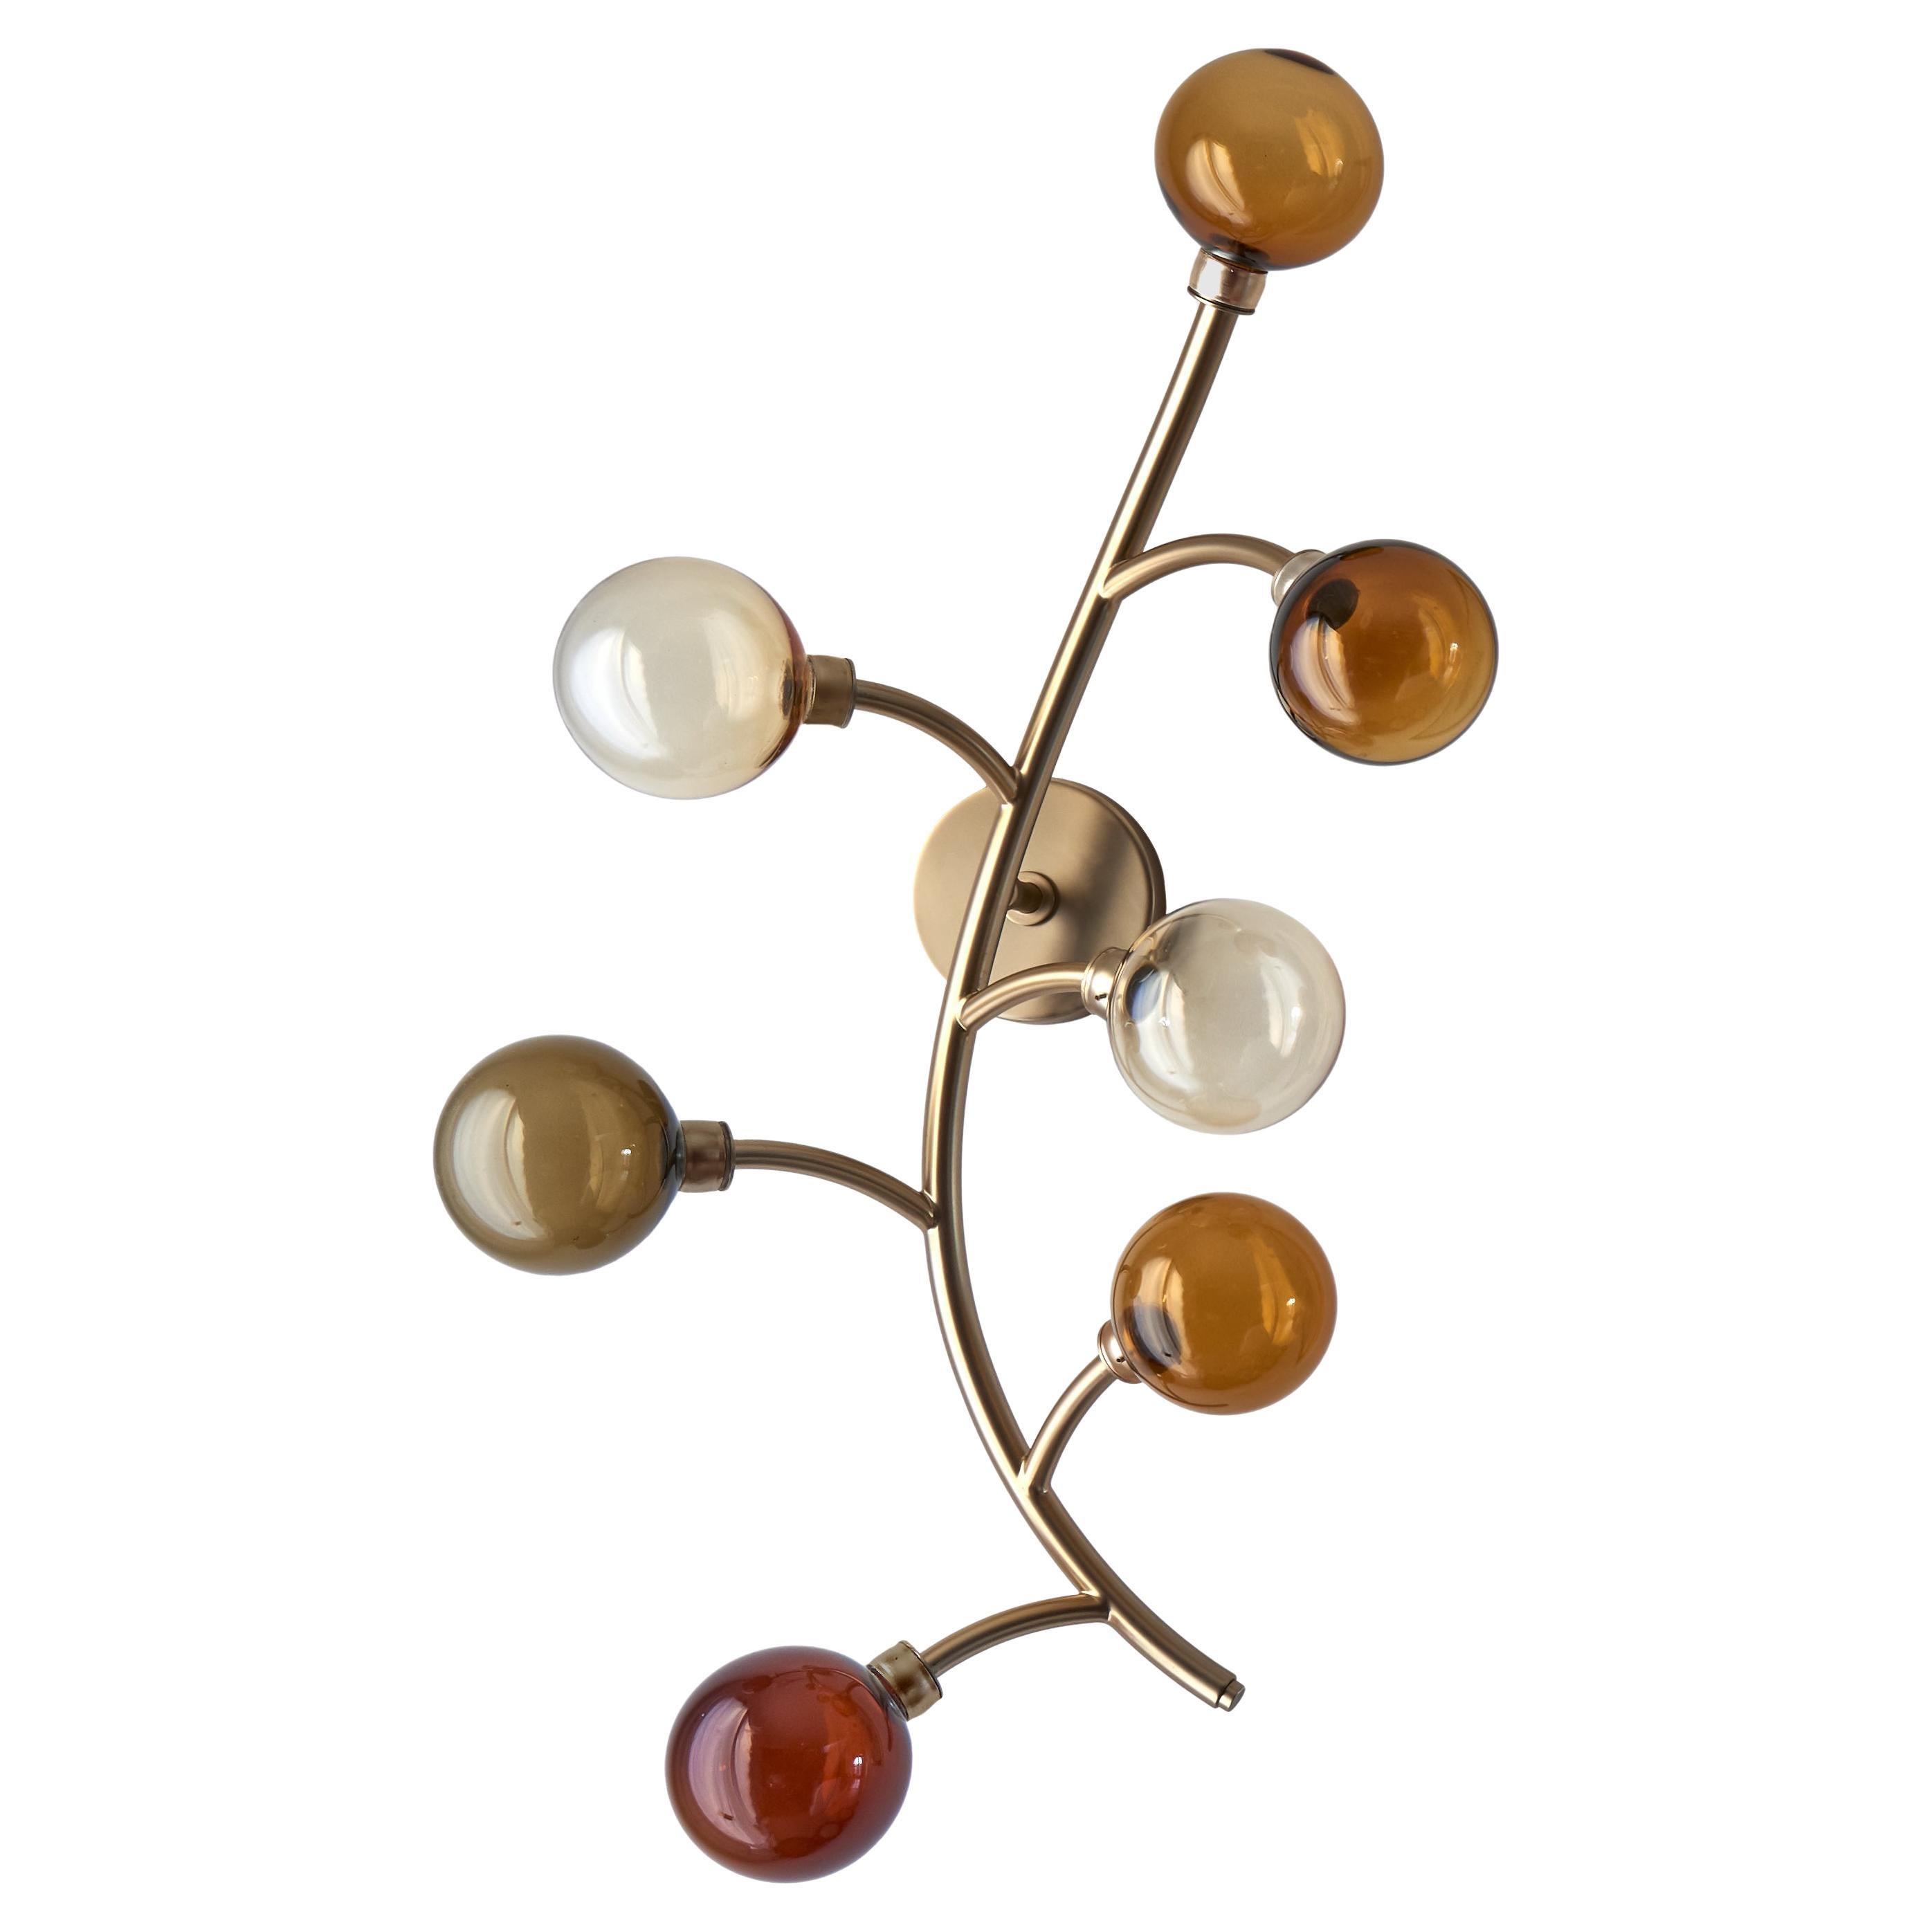 Dionysos wall sconce by Emilie Lemardeley, brass and glass For Sale